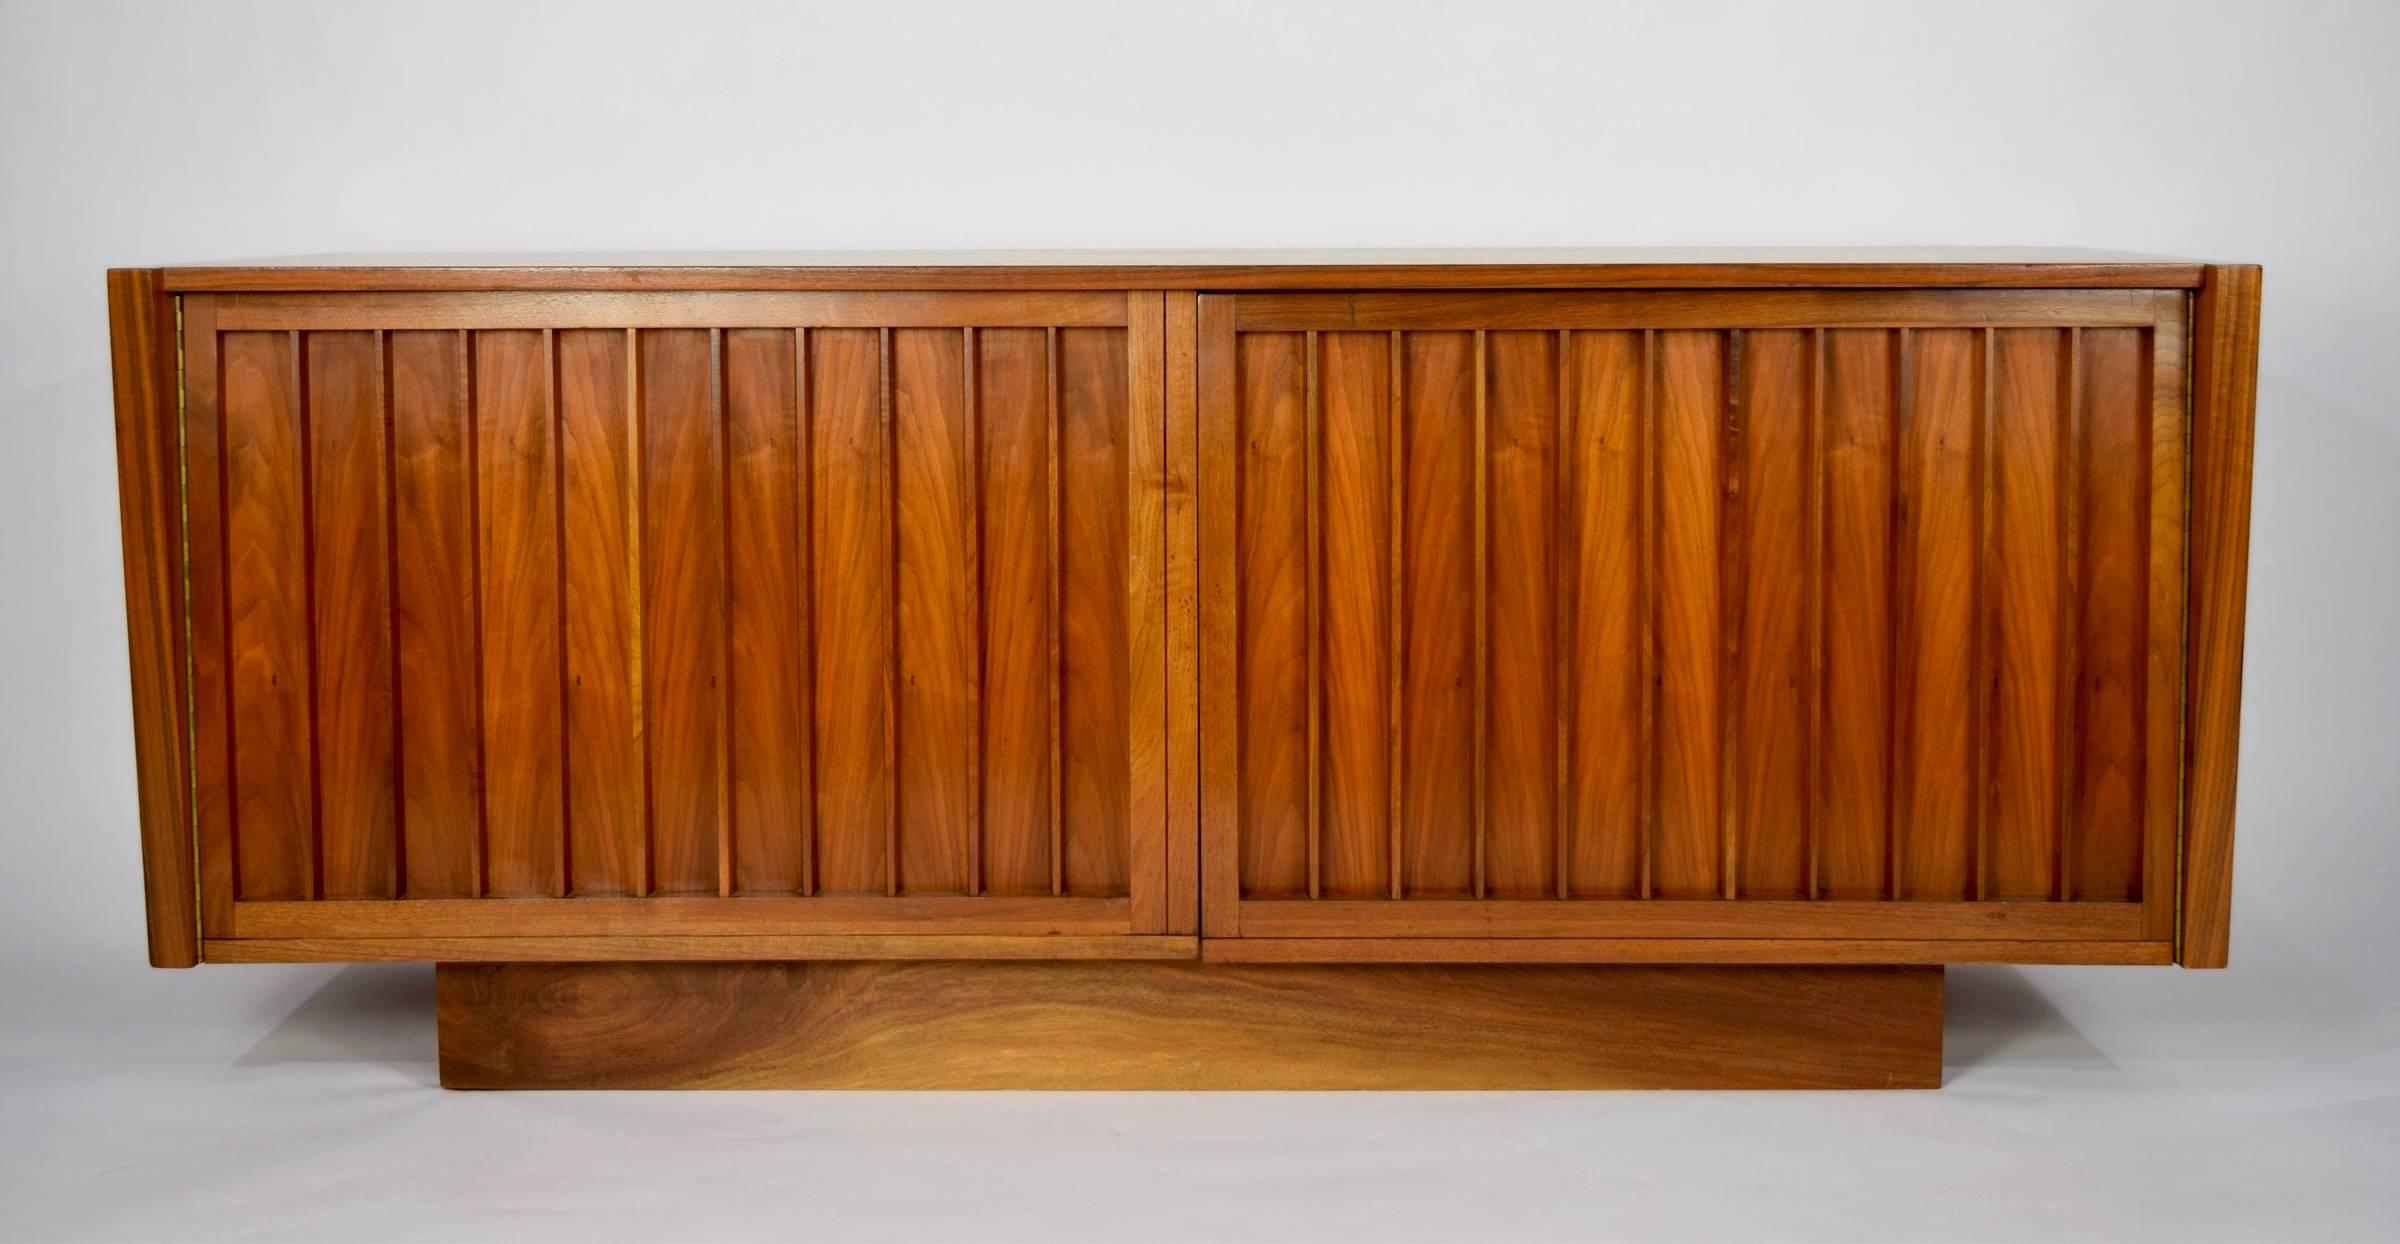 A beautiful cabinet or sideboard by George Nakashima for Widdicomb. In Sundra walnut with curved top and bowed doors that open to reveal three drawers and shelving on both sides. Nakashima signature intact along with Widdicomb label.